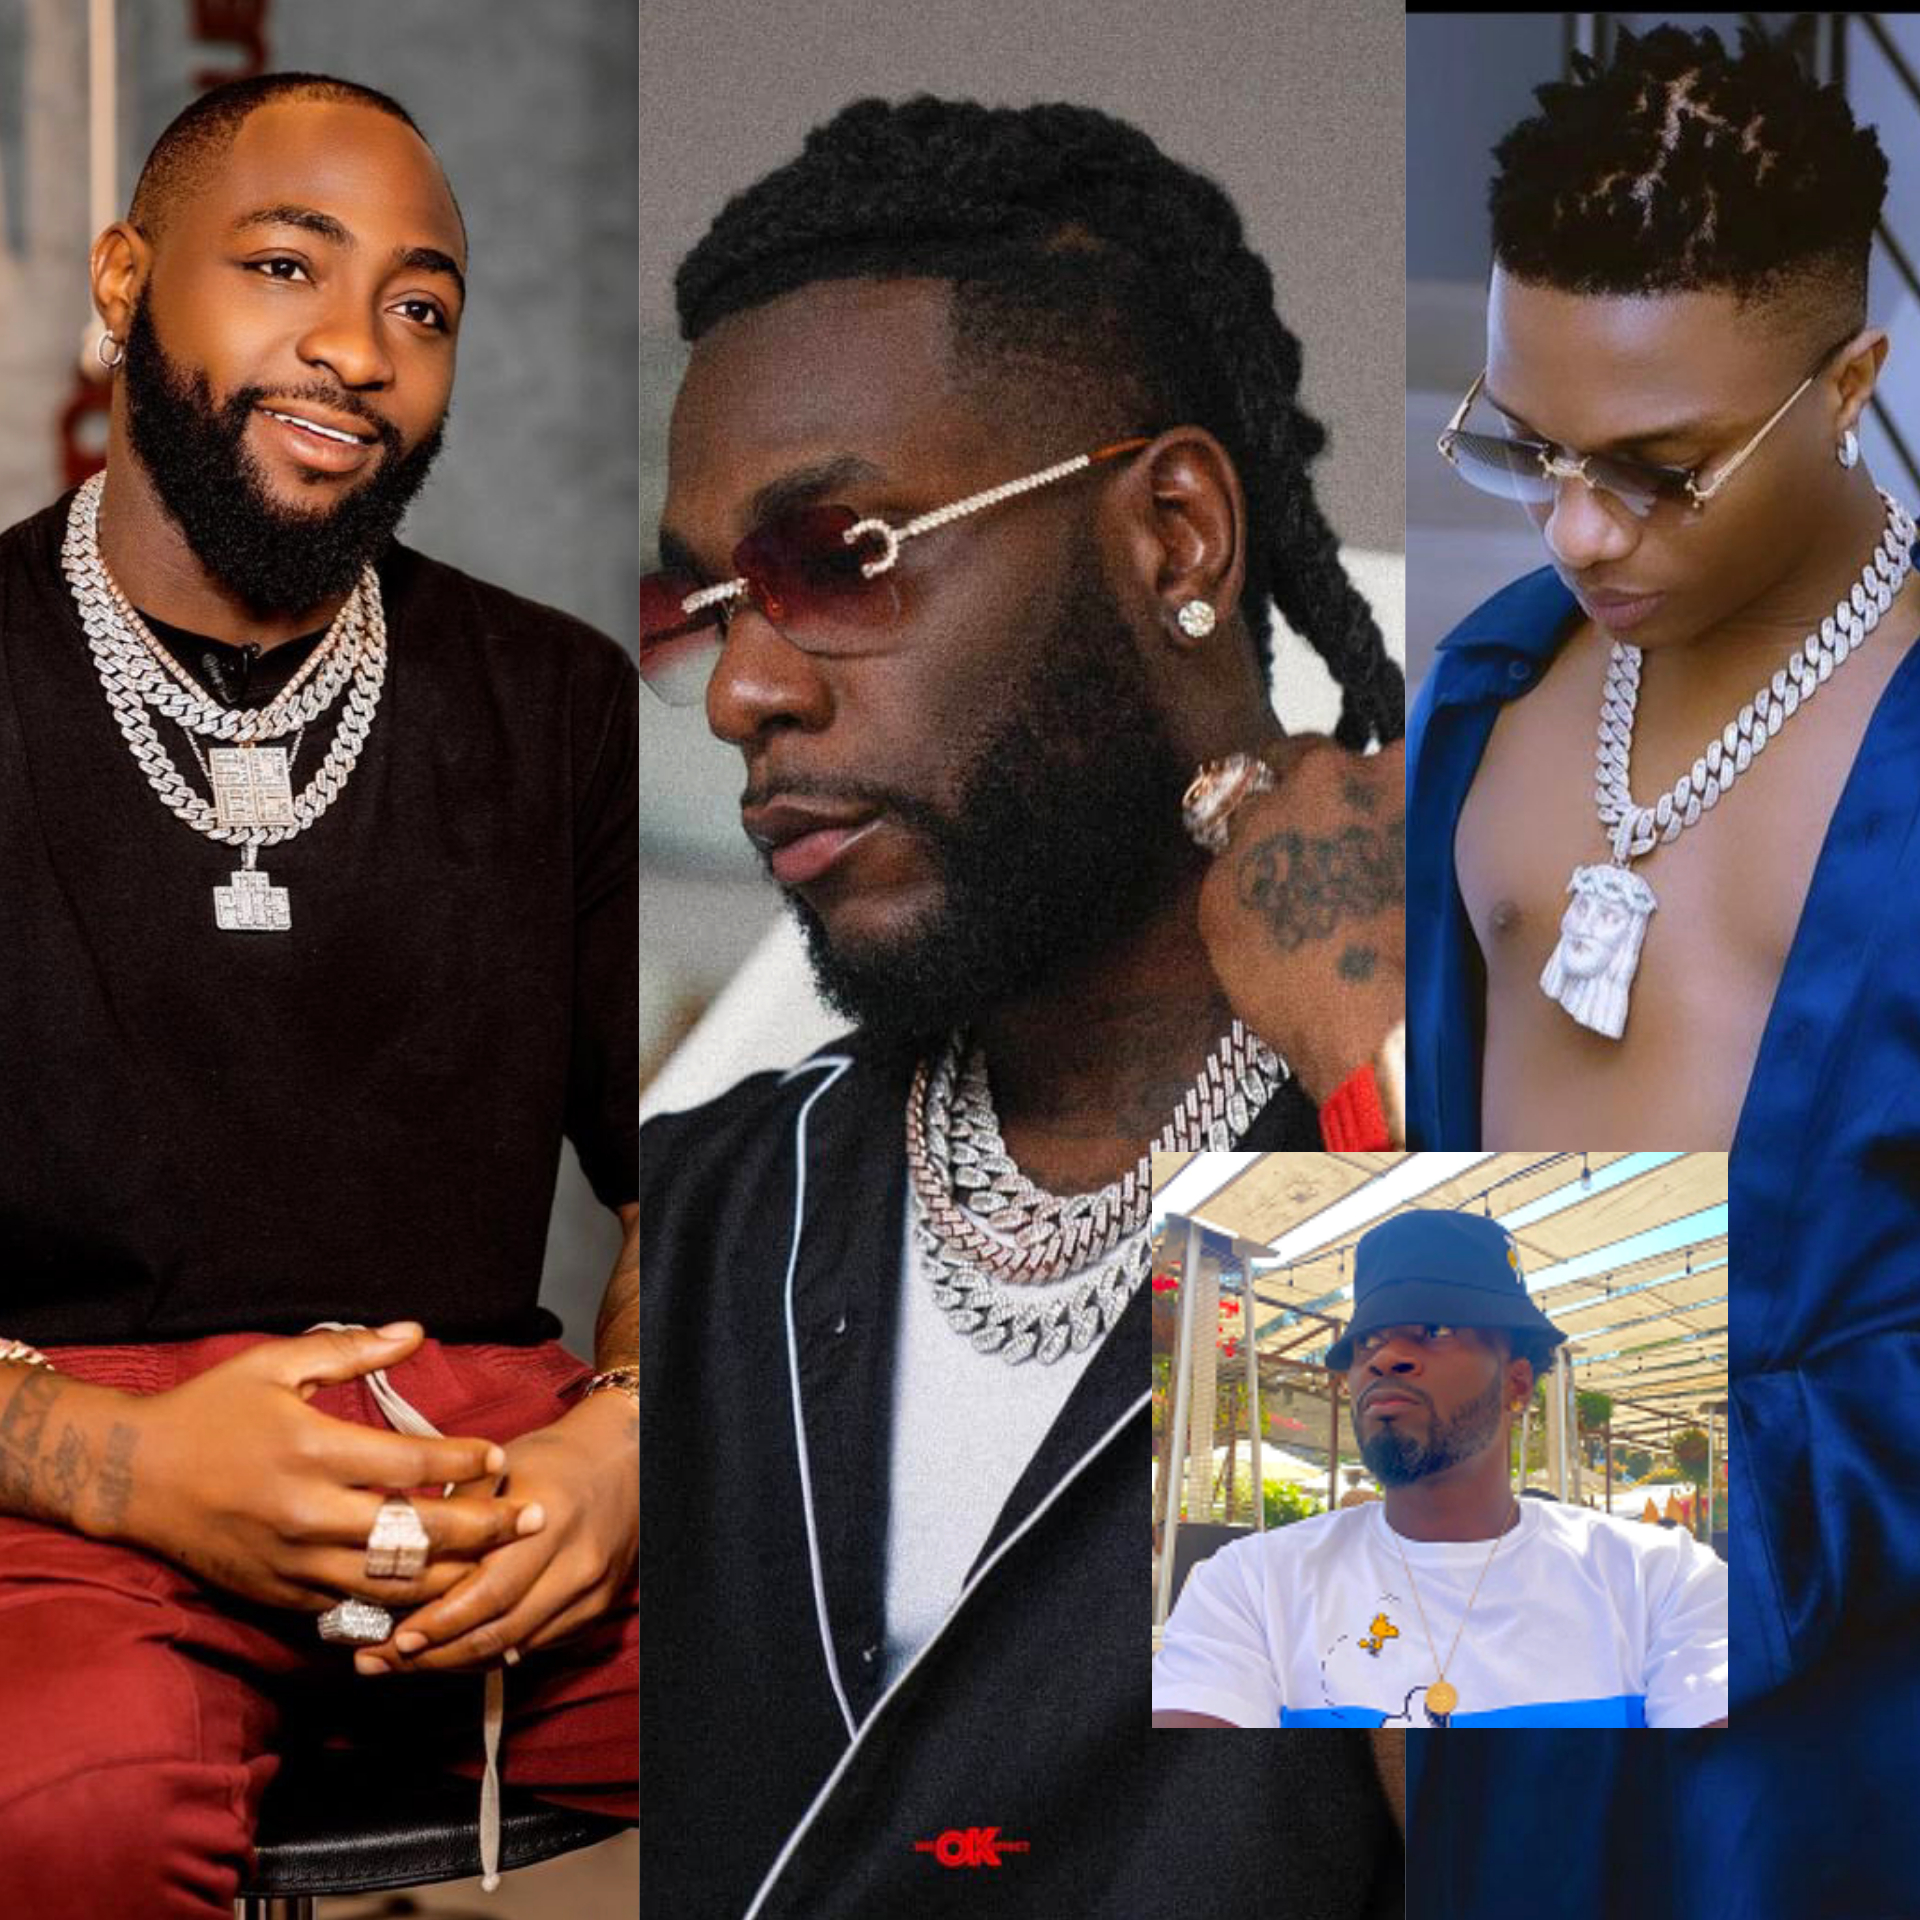 Burna Boy Wizkid and Davido are expected to outshine each other